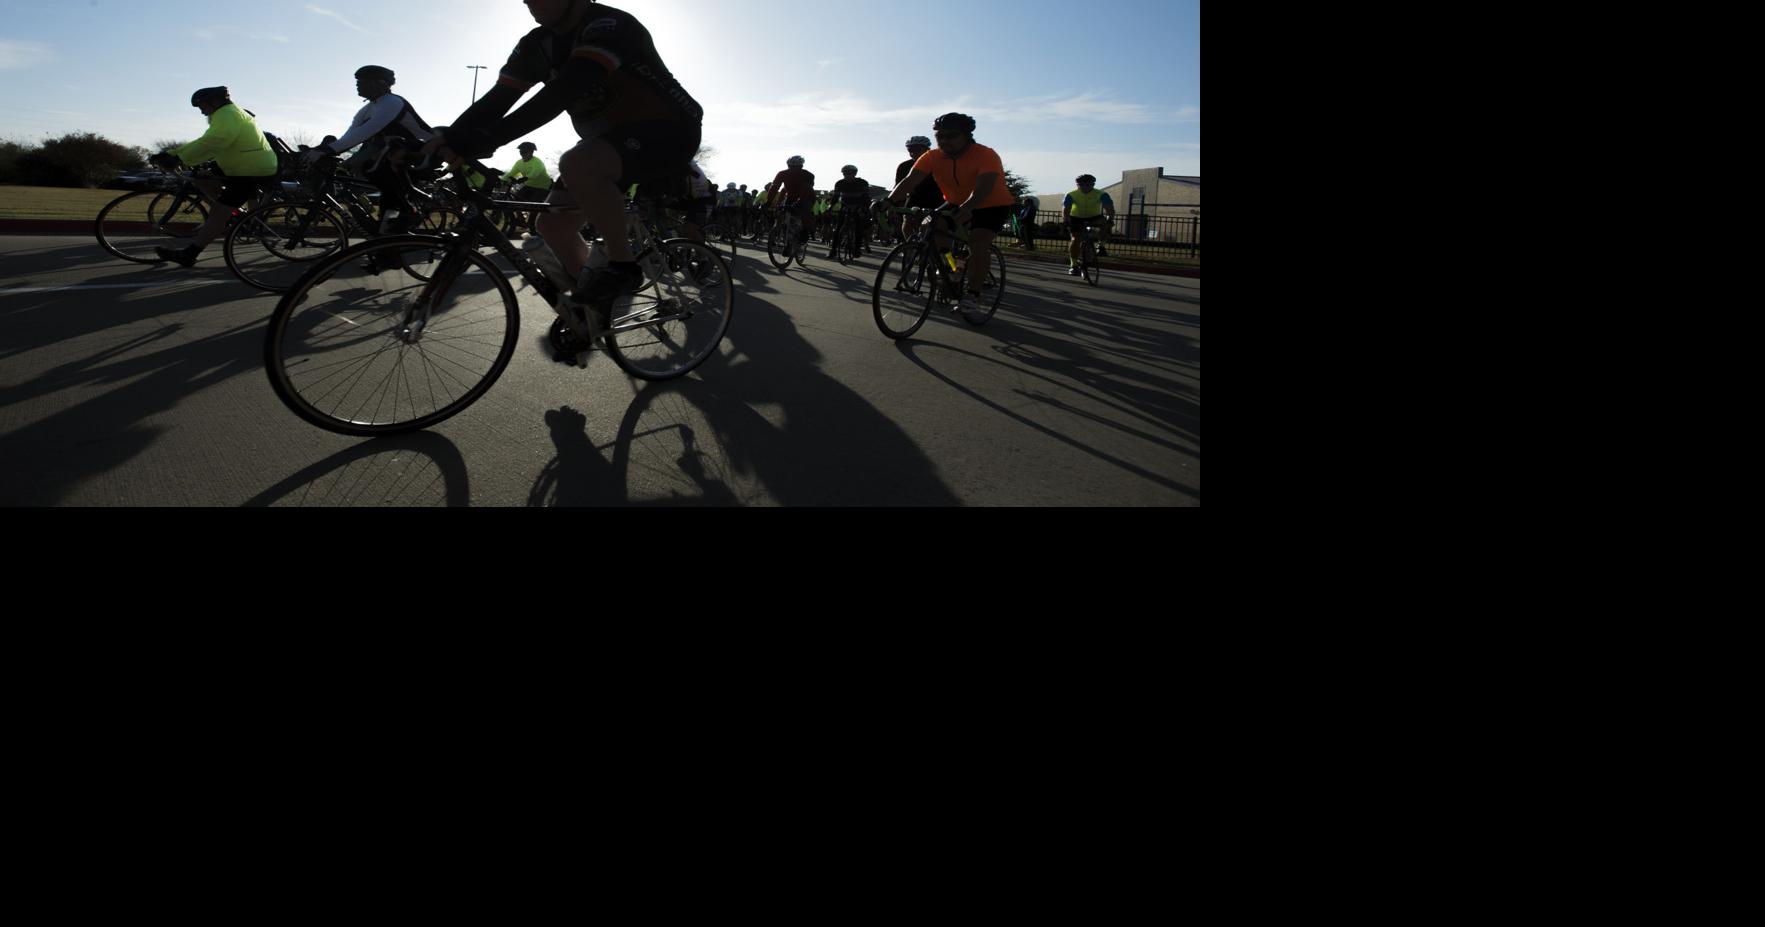 39th Turkey Roll Bicycle Rally expecting close to 1,000 riders on